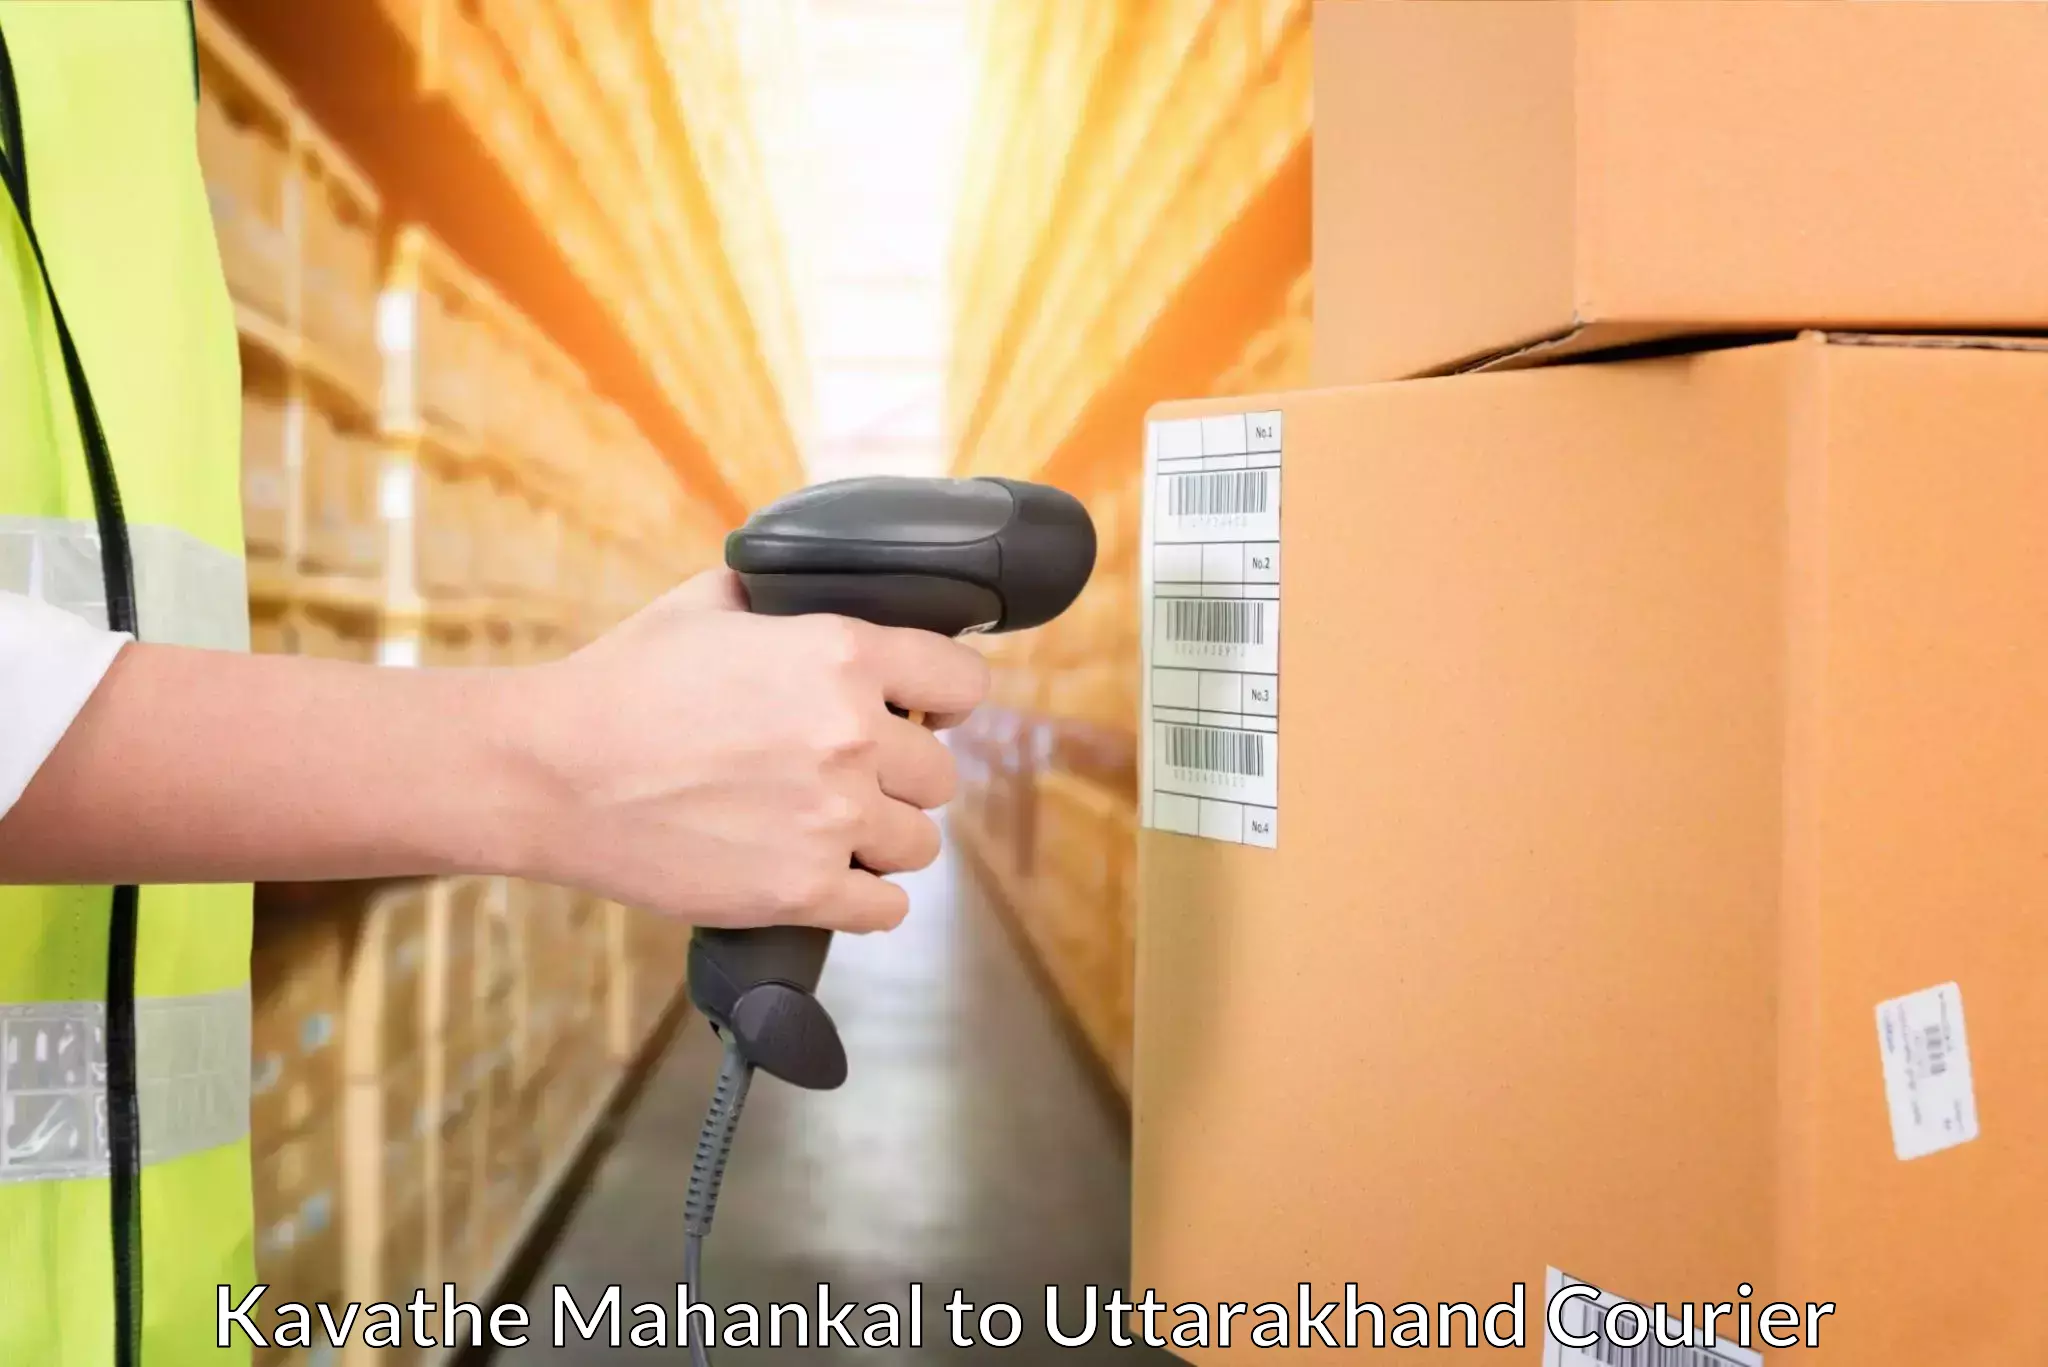 Flexible delivery schedules in Kavathe Mahankal to Uttarakhand